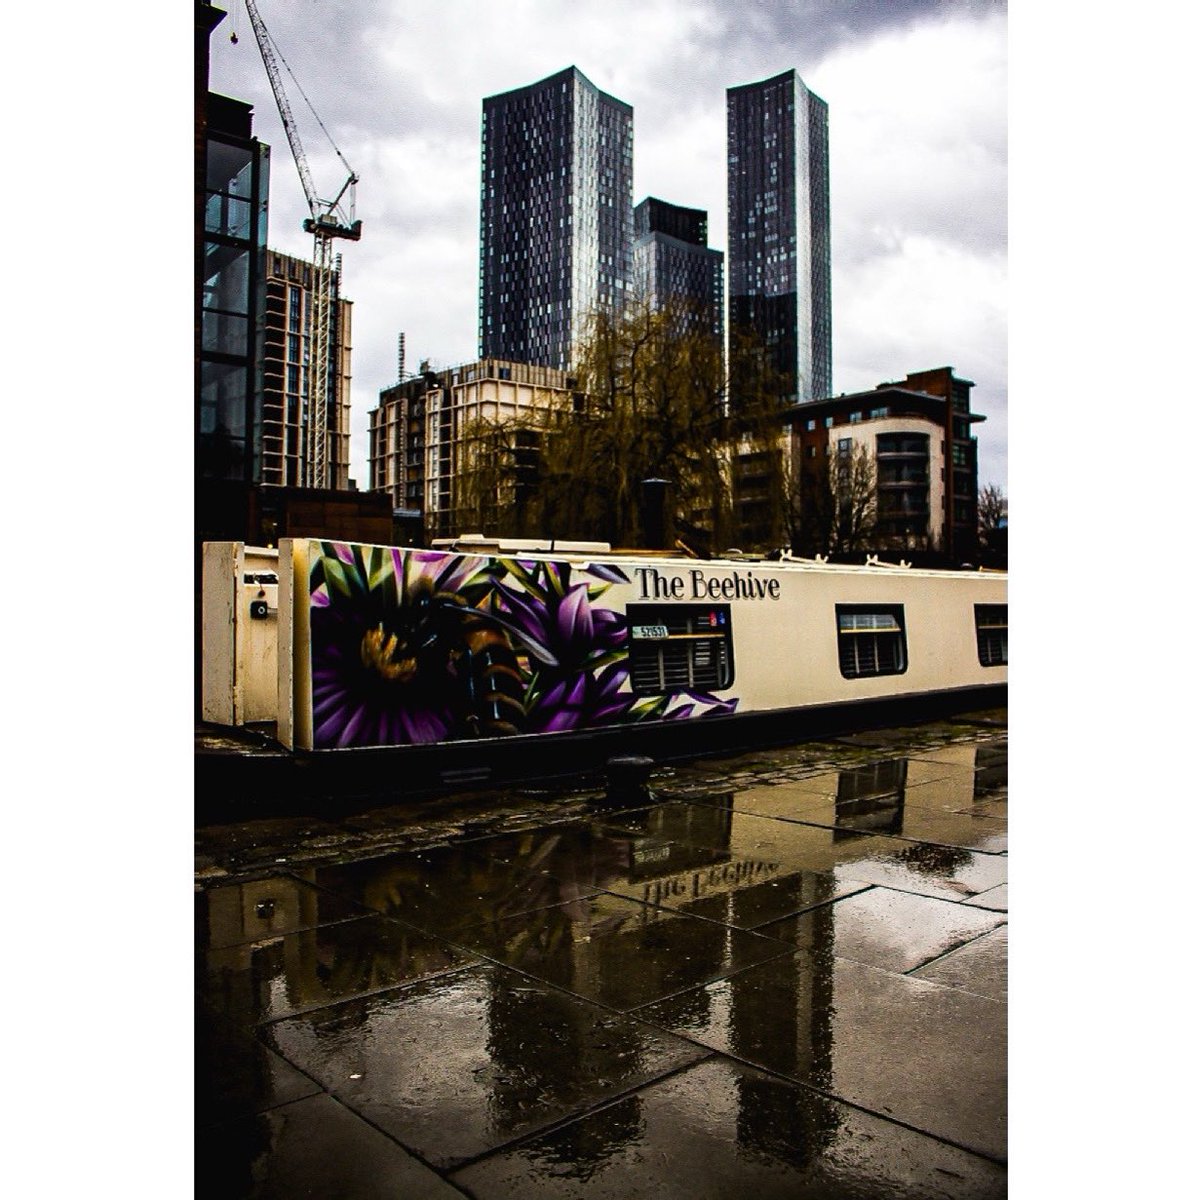 All aboard The Beehive 🐝 
.
.
.
.
.

#manchester #themanc #manchesterthroughandthrough #manchesterphotography #manchesterphotographers #mcrimages #mcruk #mcrvisuals #mcrpuddleclub #mcr_follow #mcrskyline #mcrreflects #mcrigers #igersuk #igersmanchester #manchestercanal